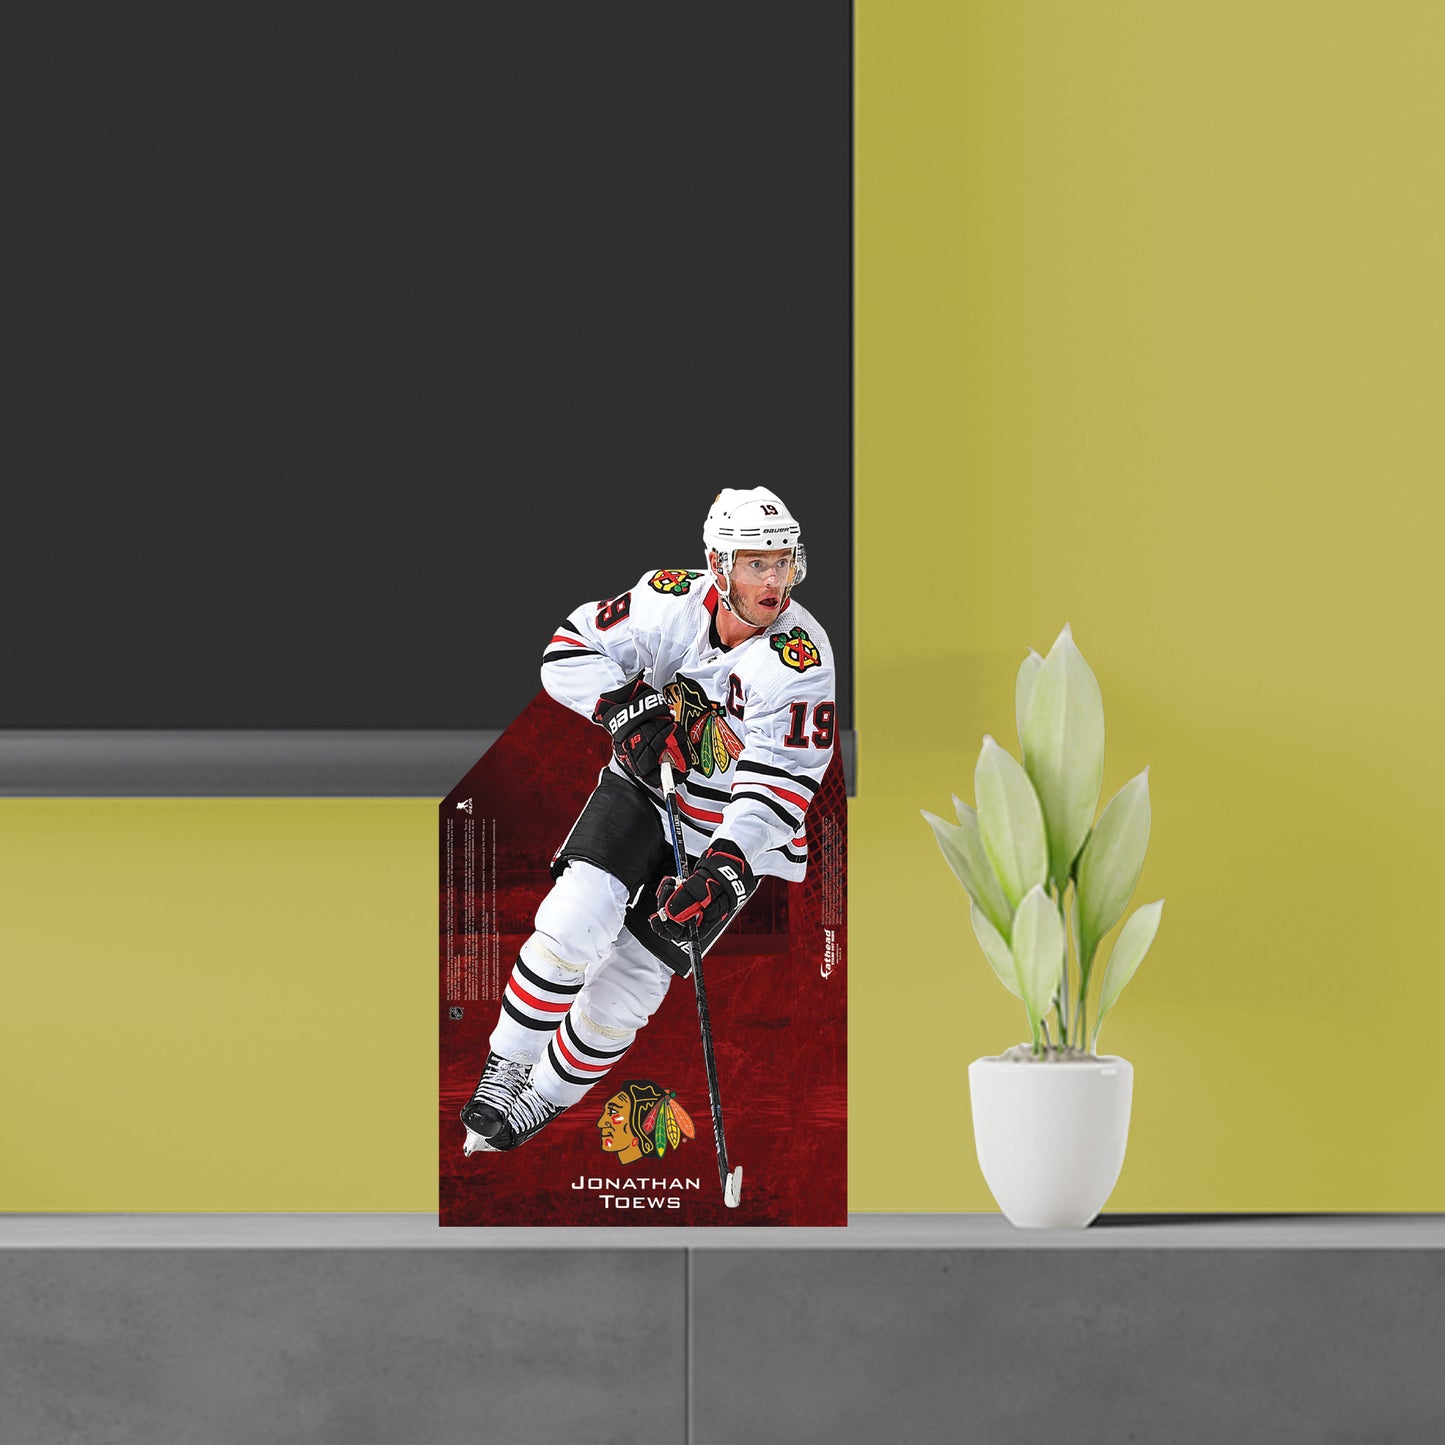 Chicago Blackhawks: Jonathan Toews Mini Cardstock Cutout - Officially Licensed NHL Stand Out